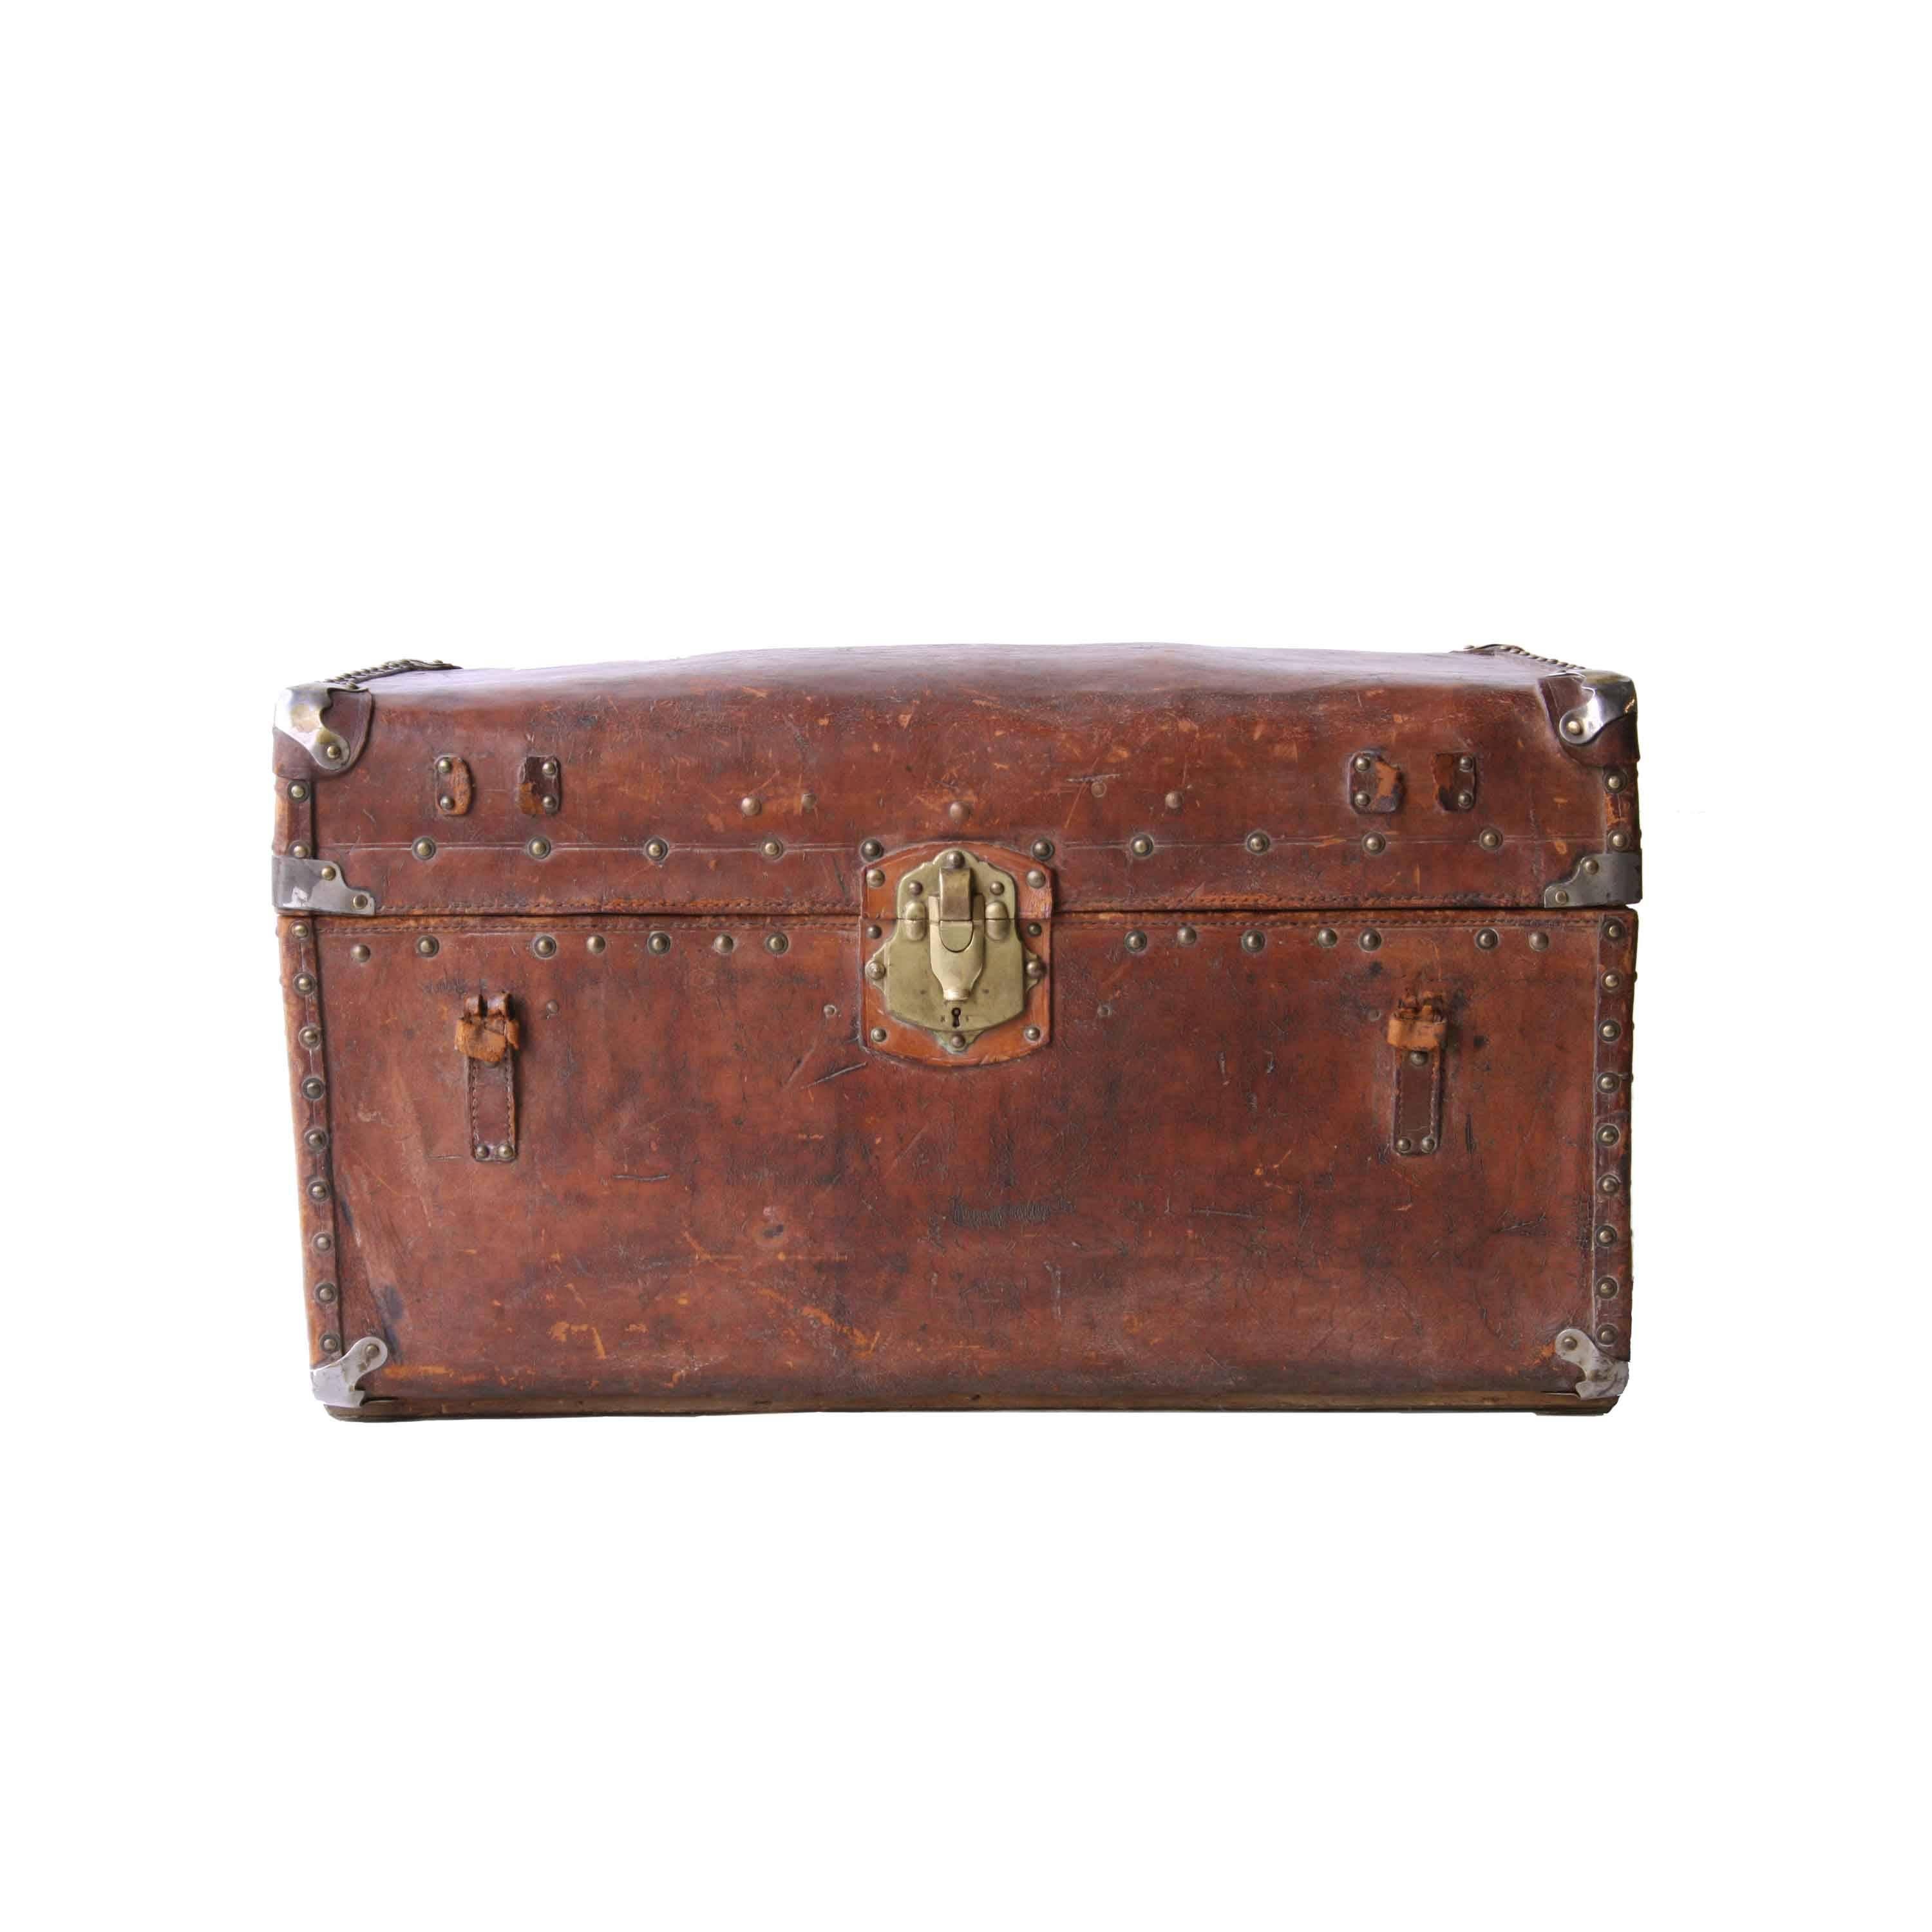 Cargo trunk in brown leather with metal details, Hati, 1900.

